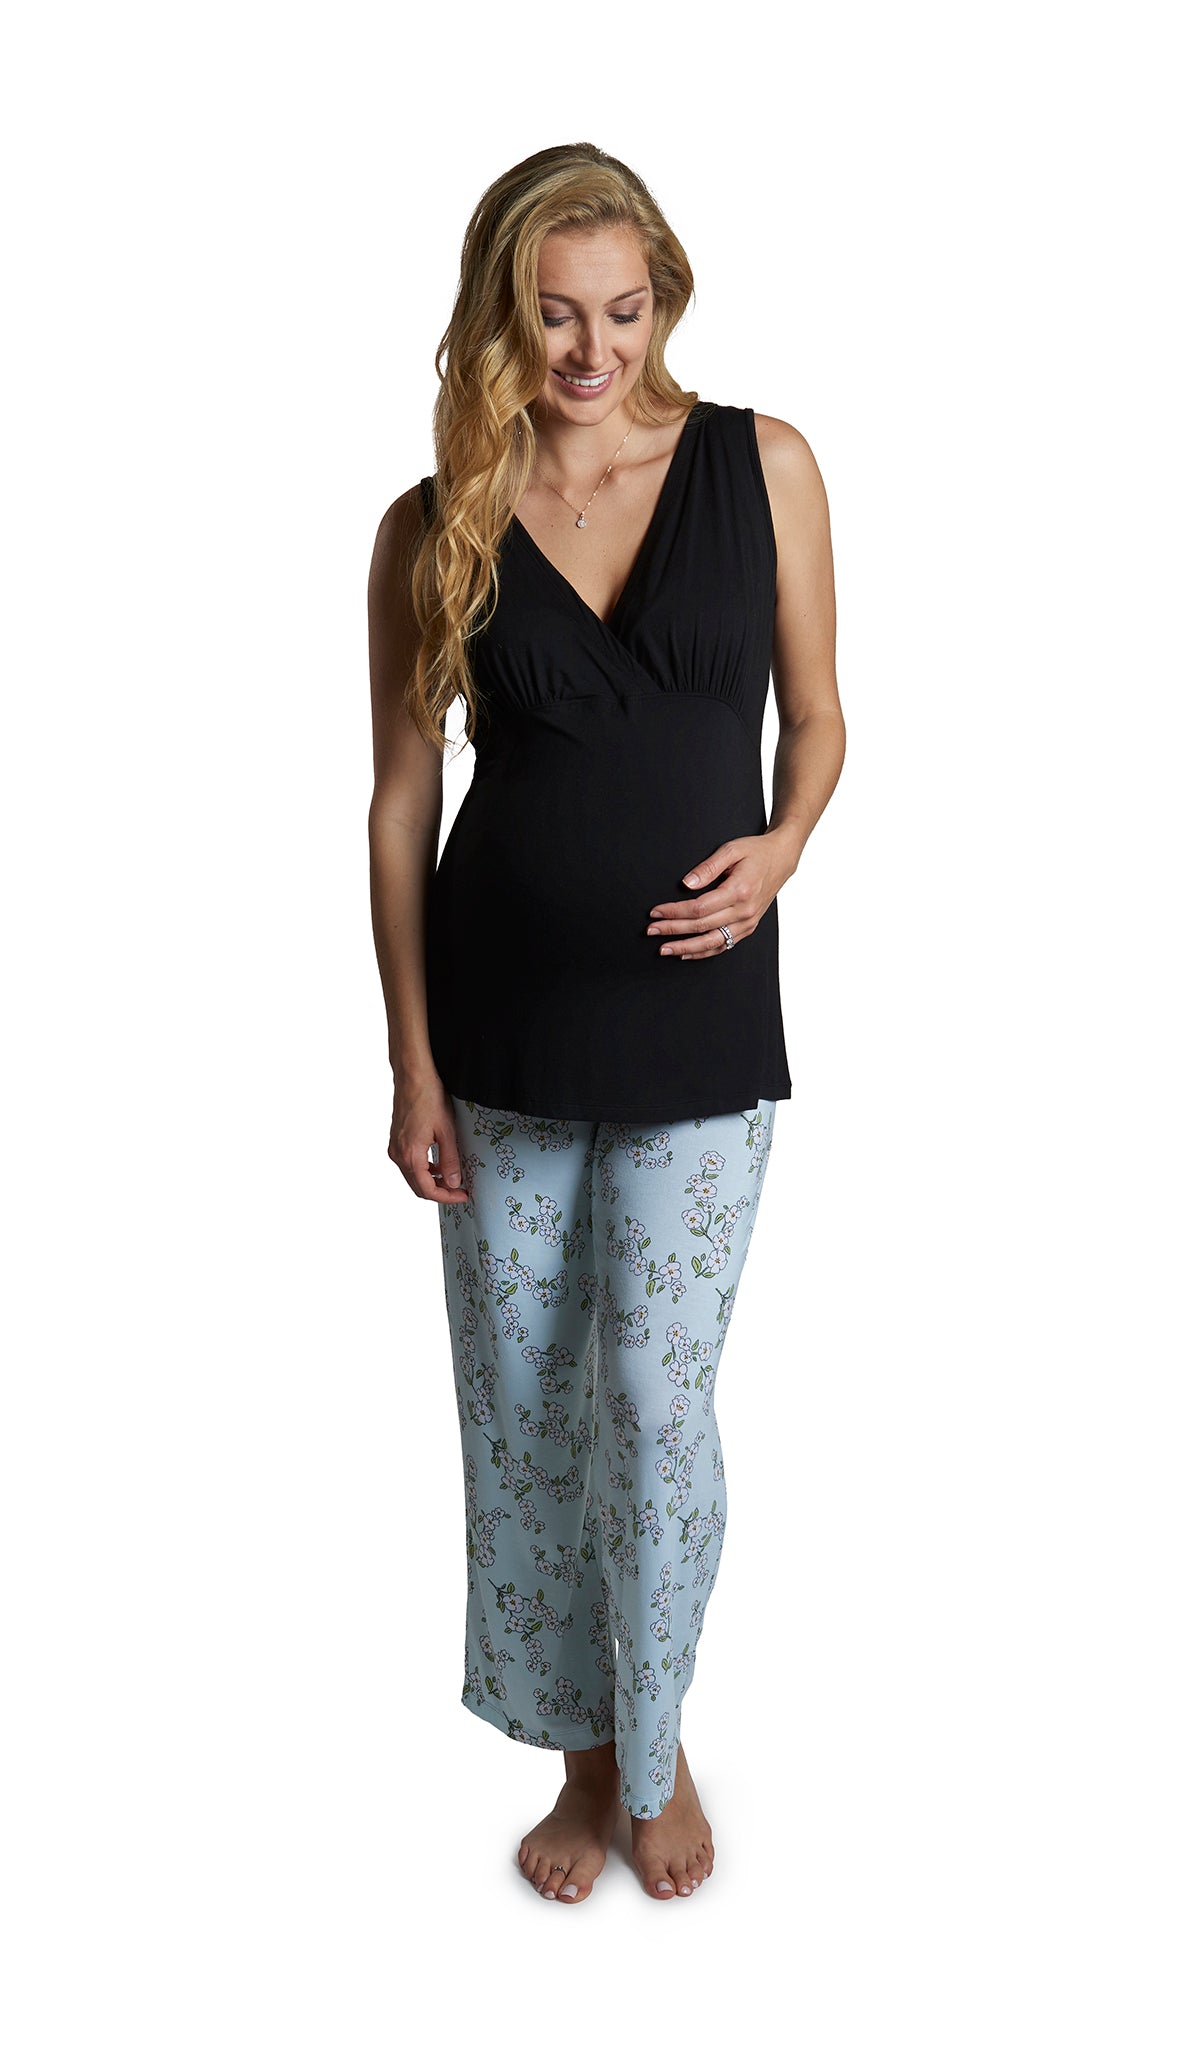 Baby's Breath Analise 5-Piece Set, pregnant woman wearing criss-cross bust tank top and pant.